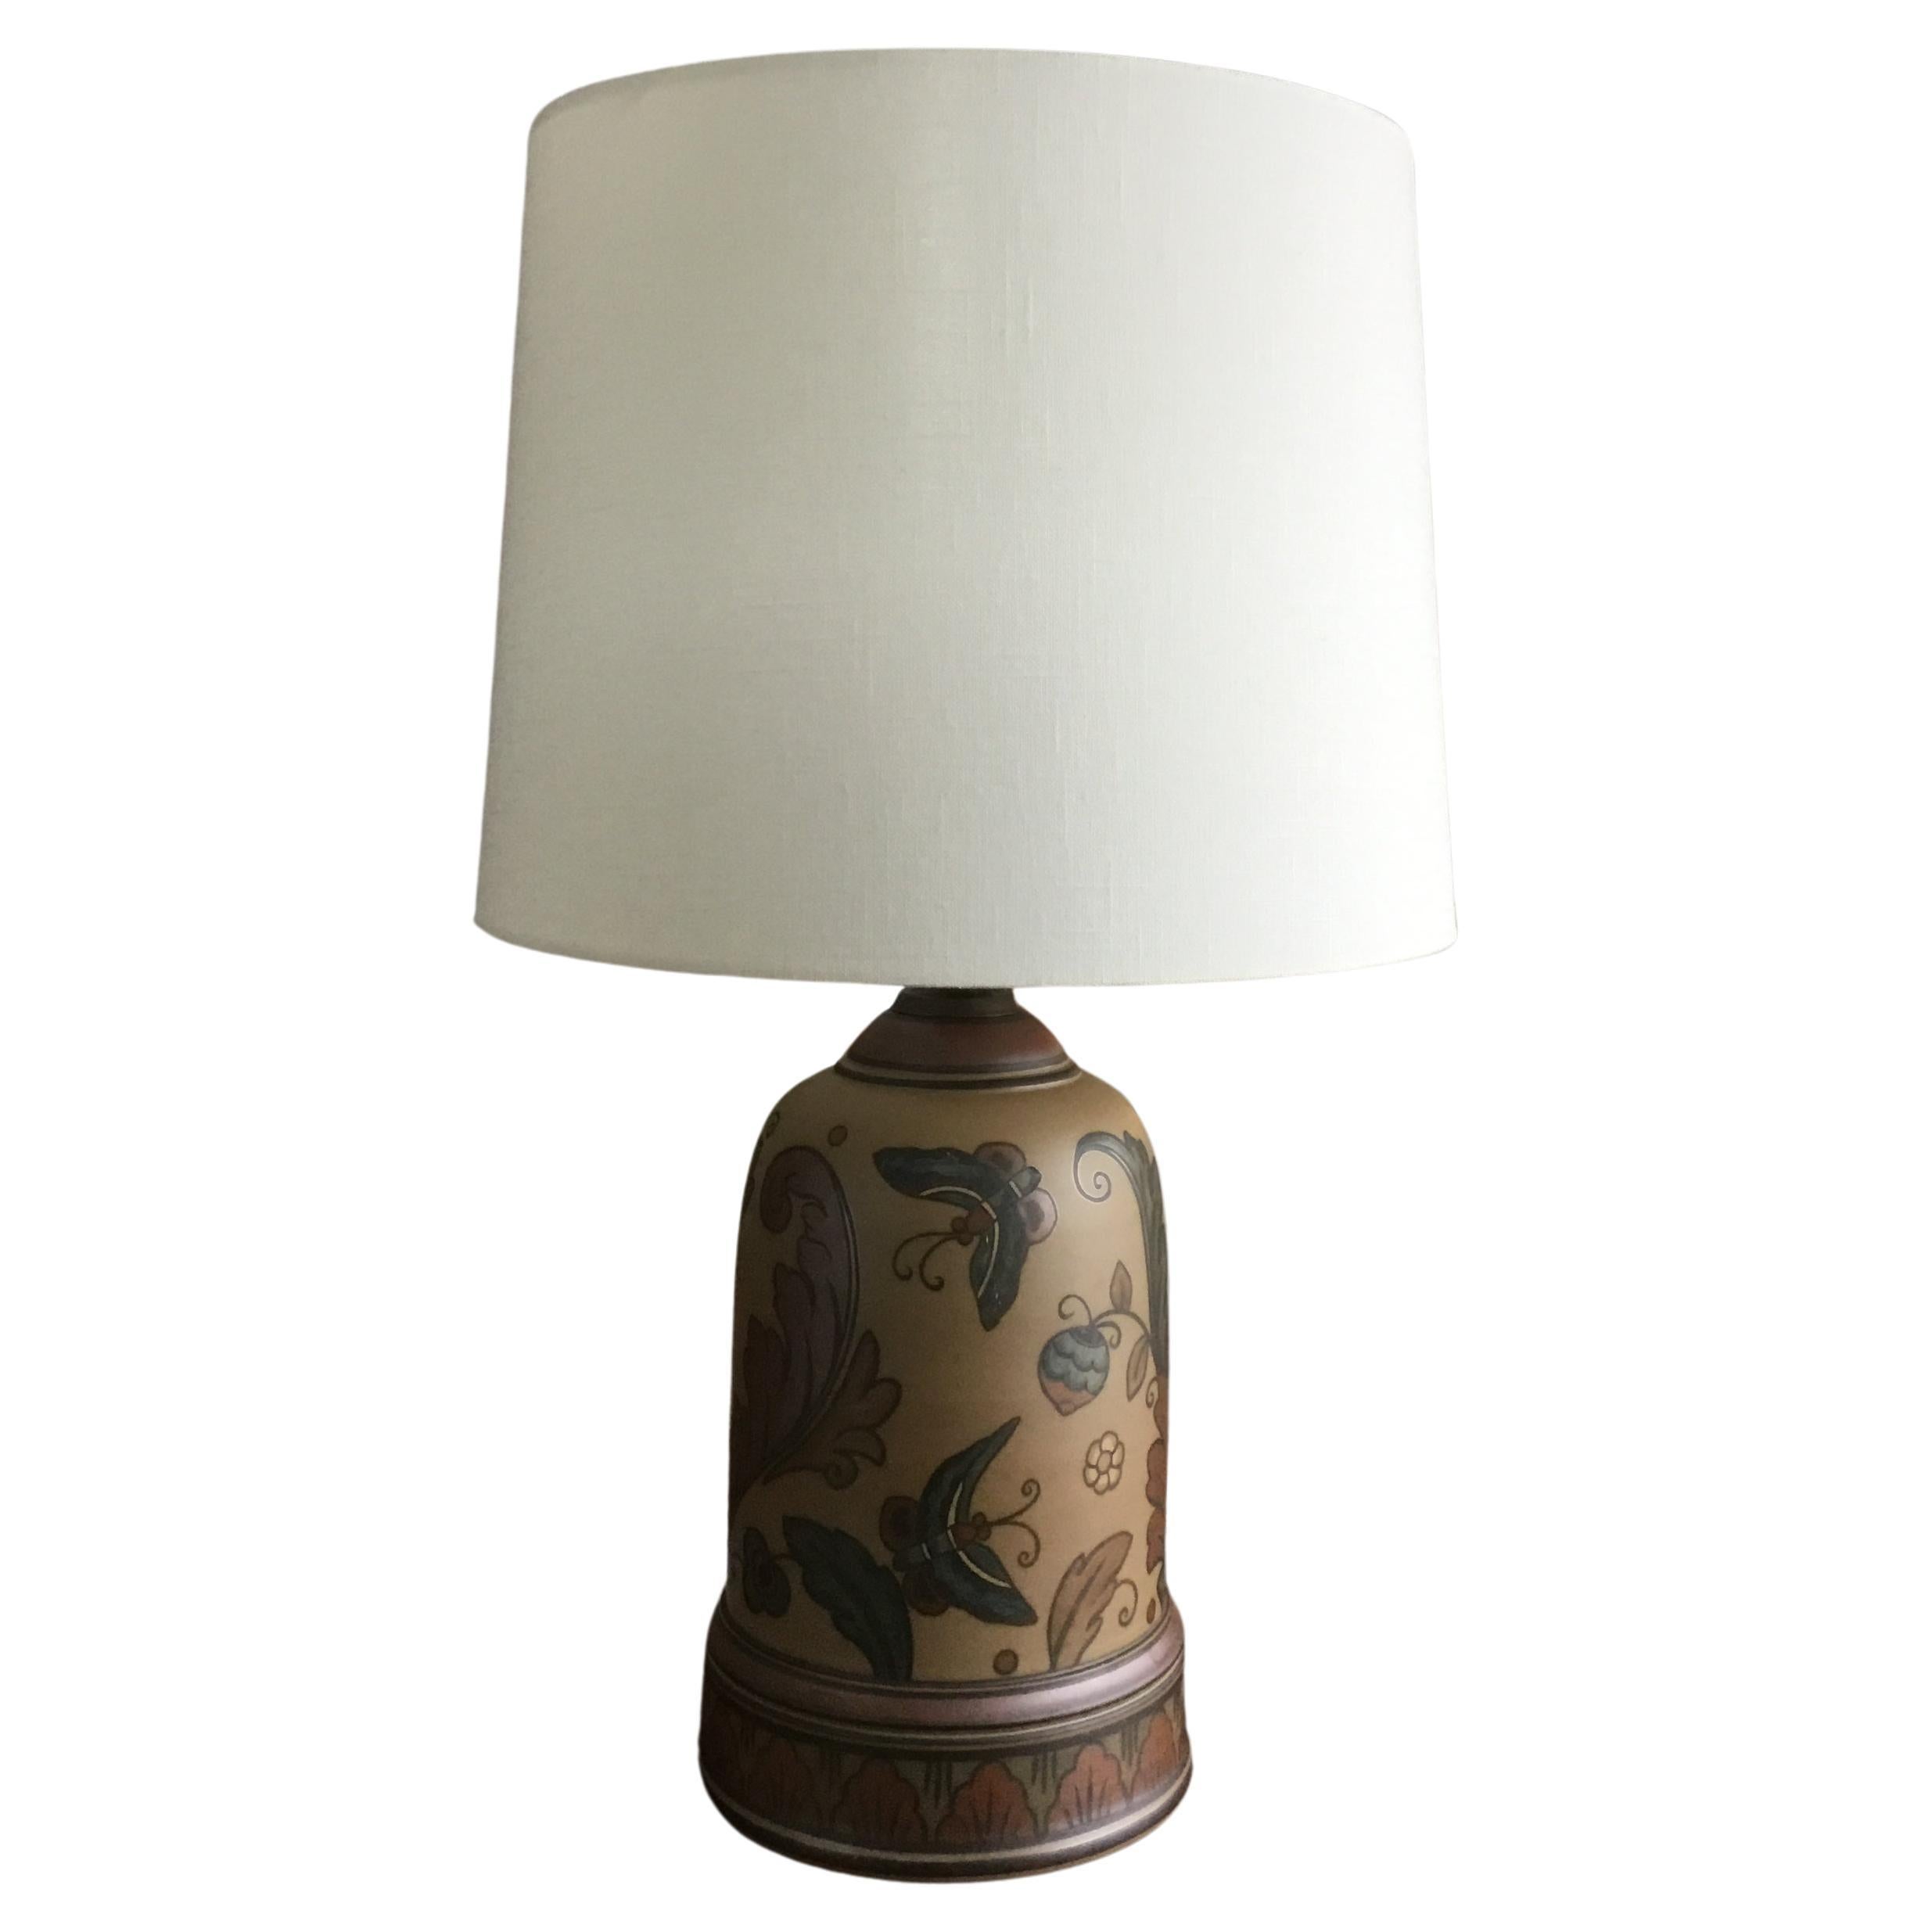 Art Nouveau table lamp by the Danish ceramic studio L. Hjorth on the island of Bornholm.
The Lamp base is made of light mocha brown ceramic decorated with leaves and butterflies. The colors of the decoration are maroon, greenish blue, brown and